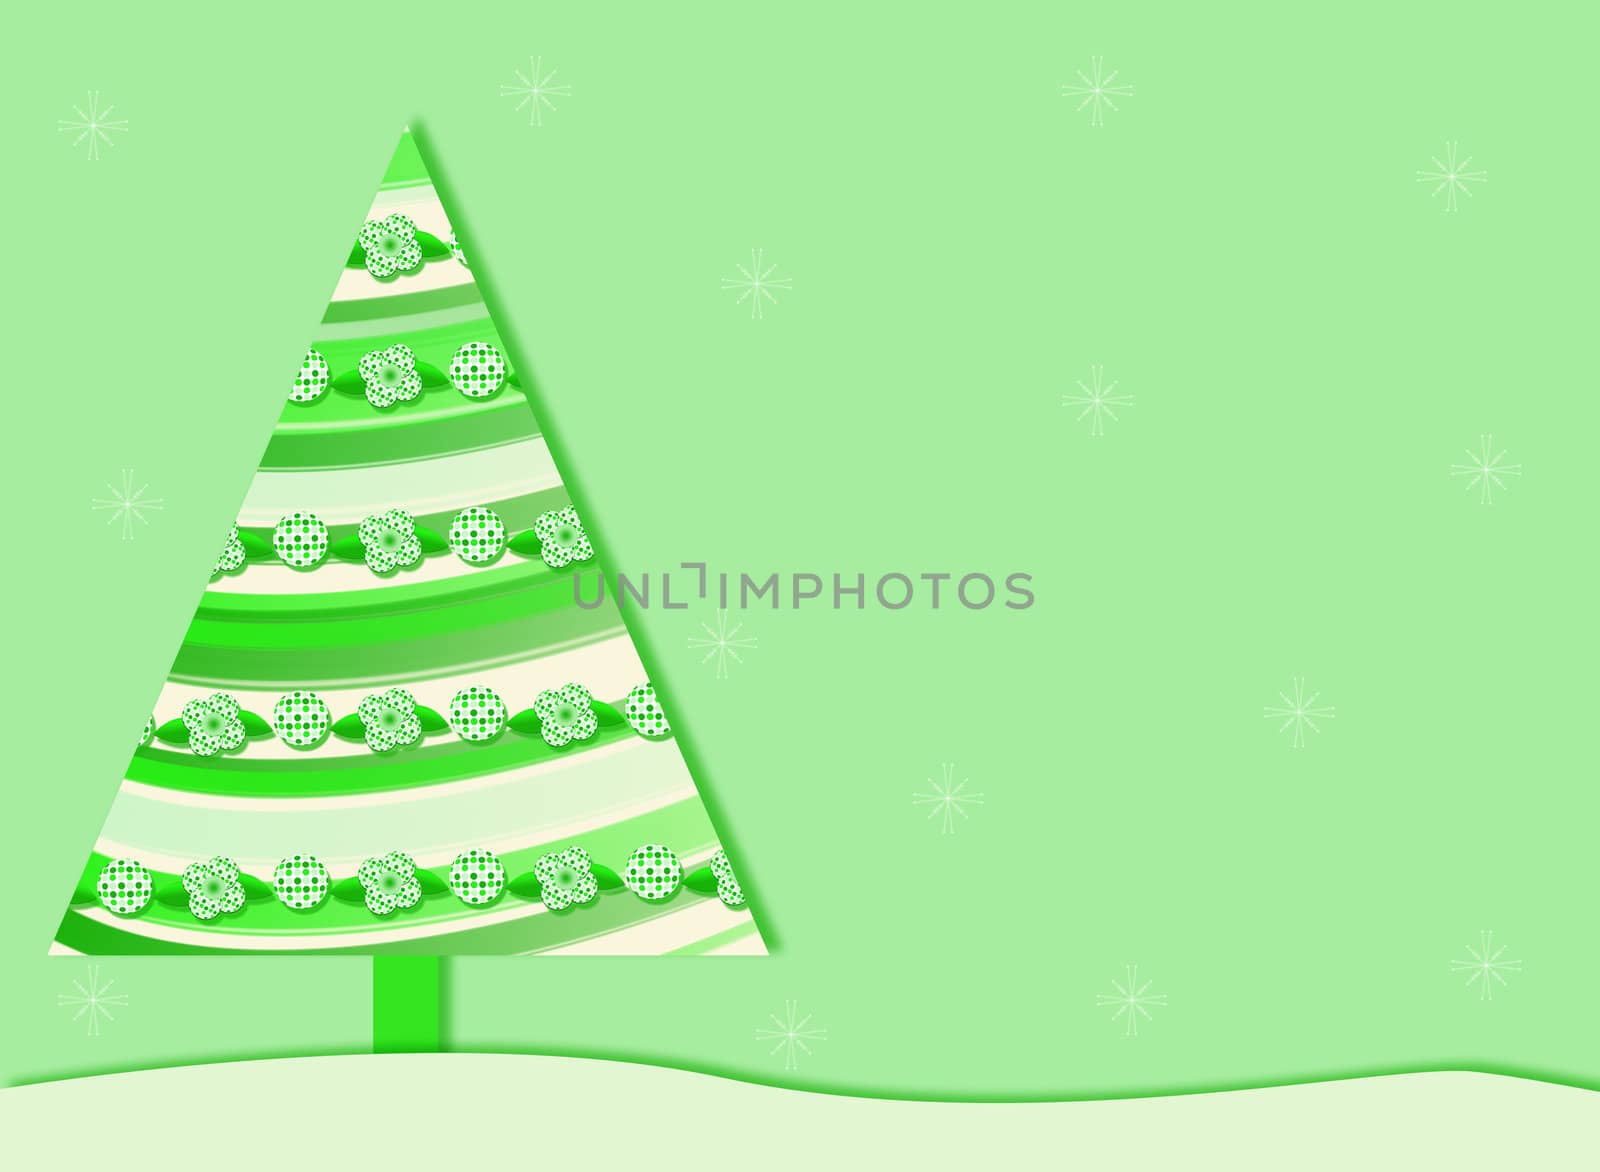 Green Retro Christmas tree background by ftlaudgirl